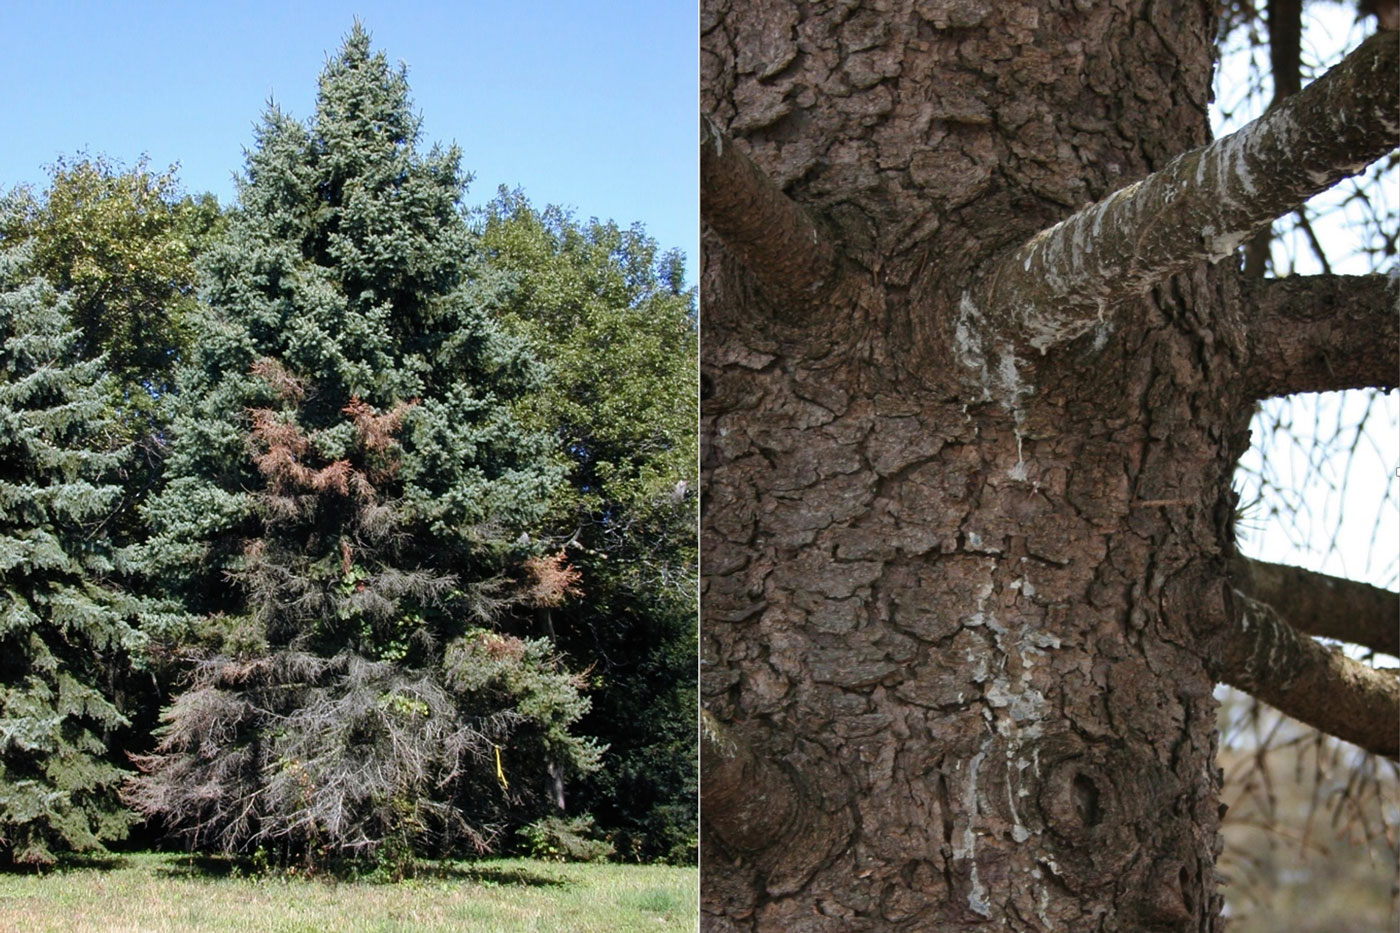 Cytospora tree dying from the bottom up on left and Cytospora sap flowing down trunk on right